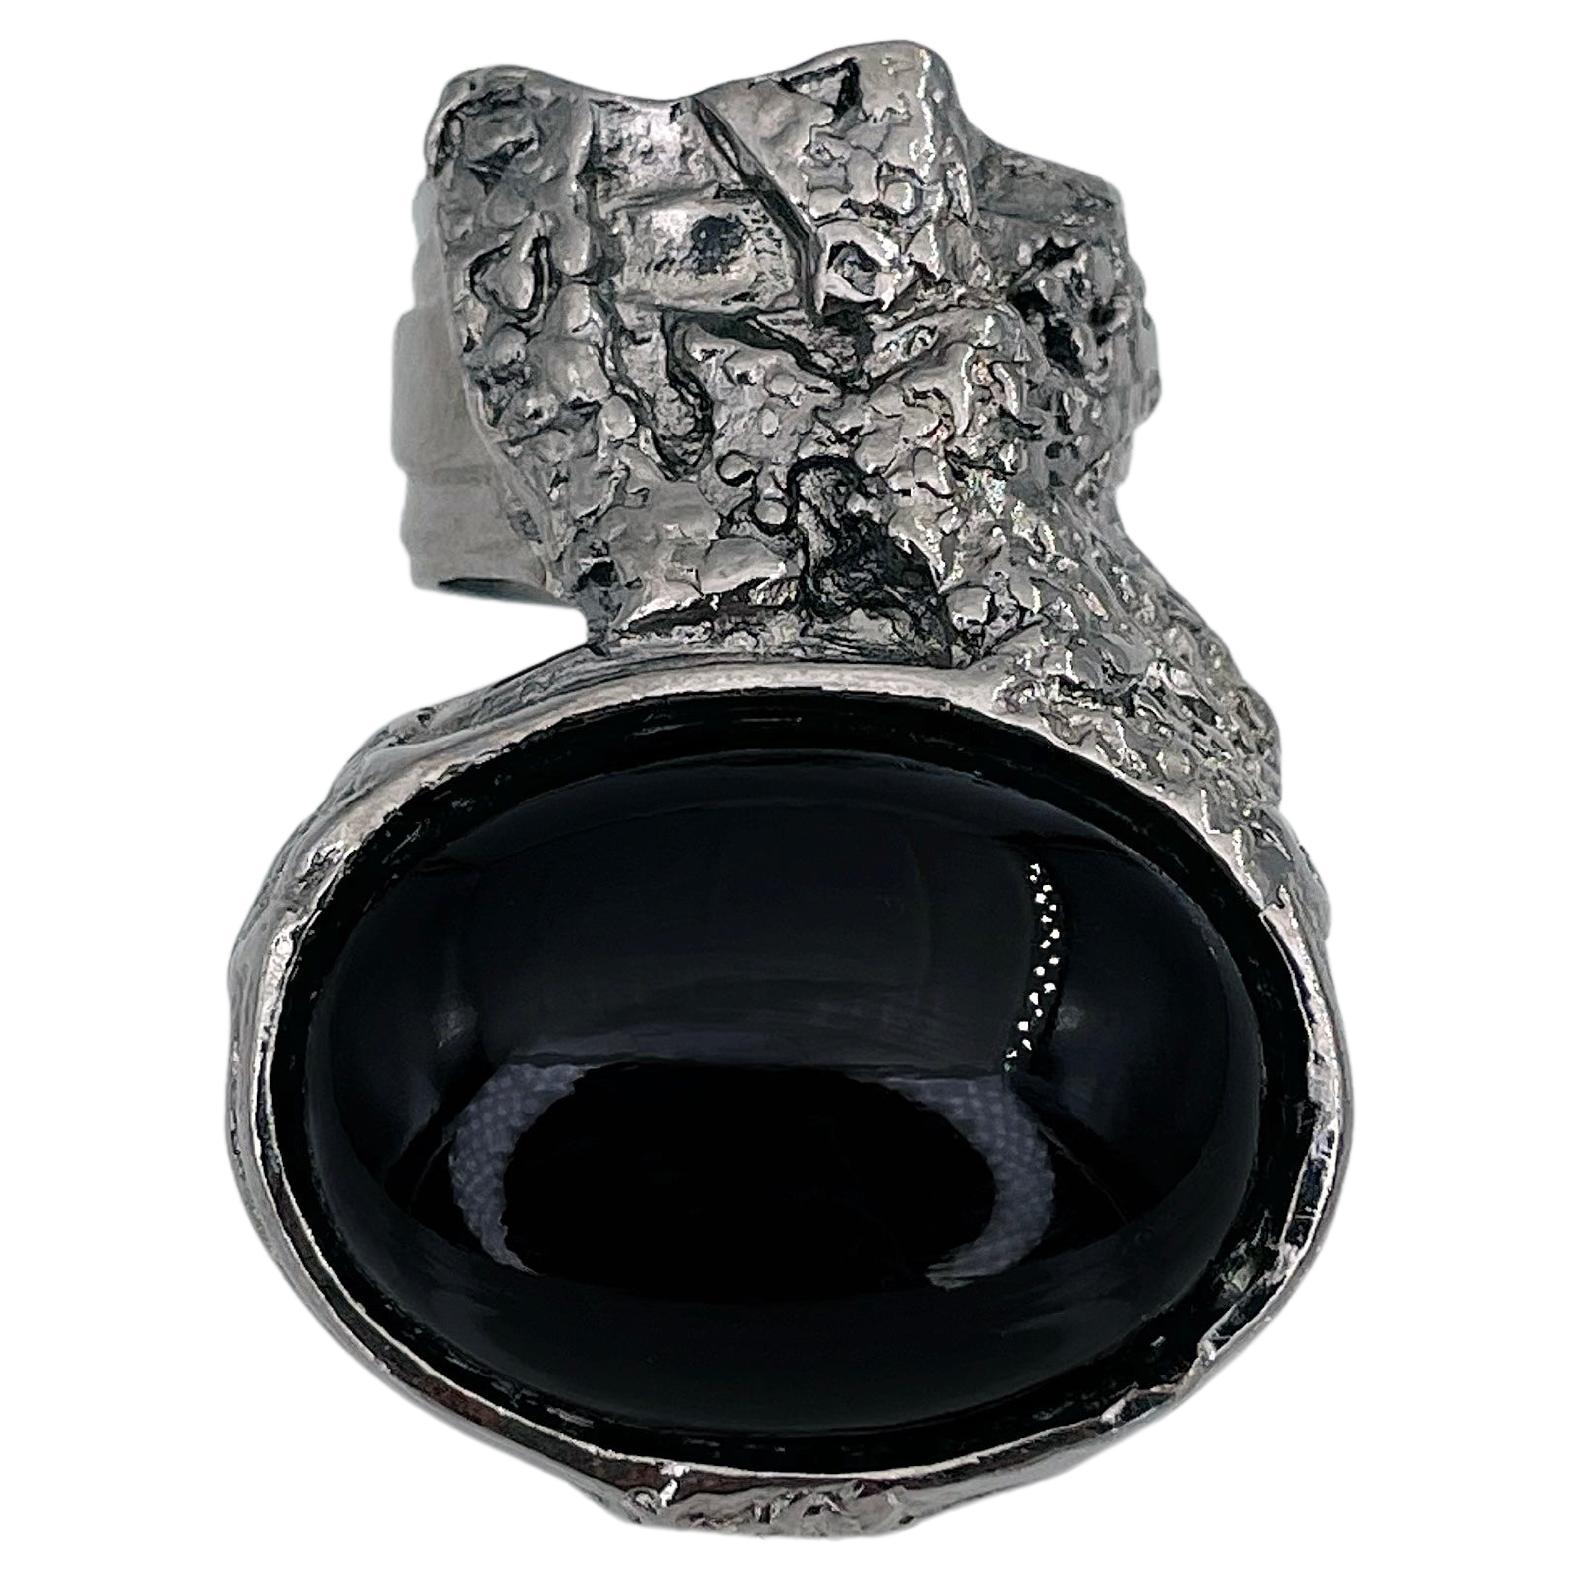 Yves Saint Laurent YSL Arty Silver Tone Black Cocktail Ring